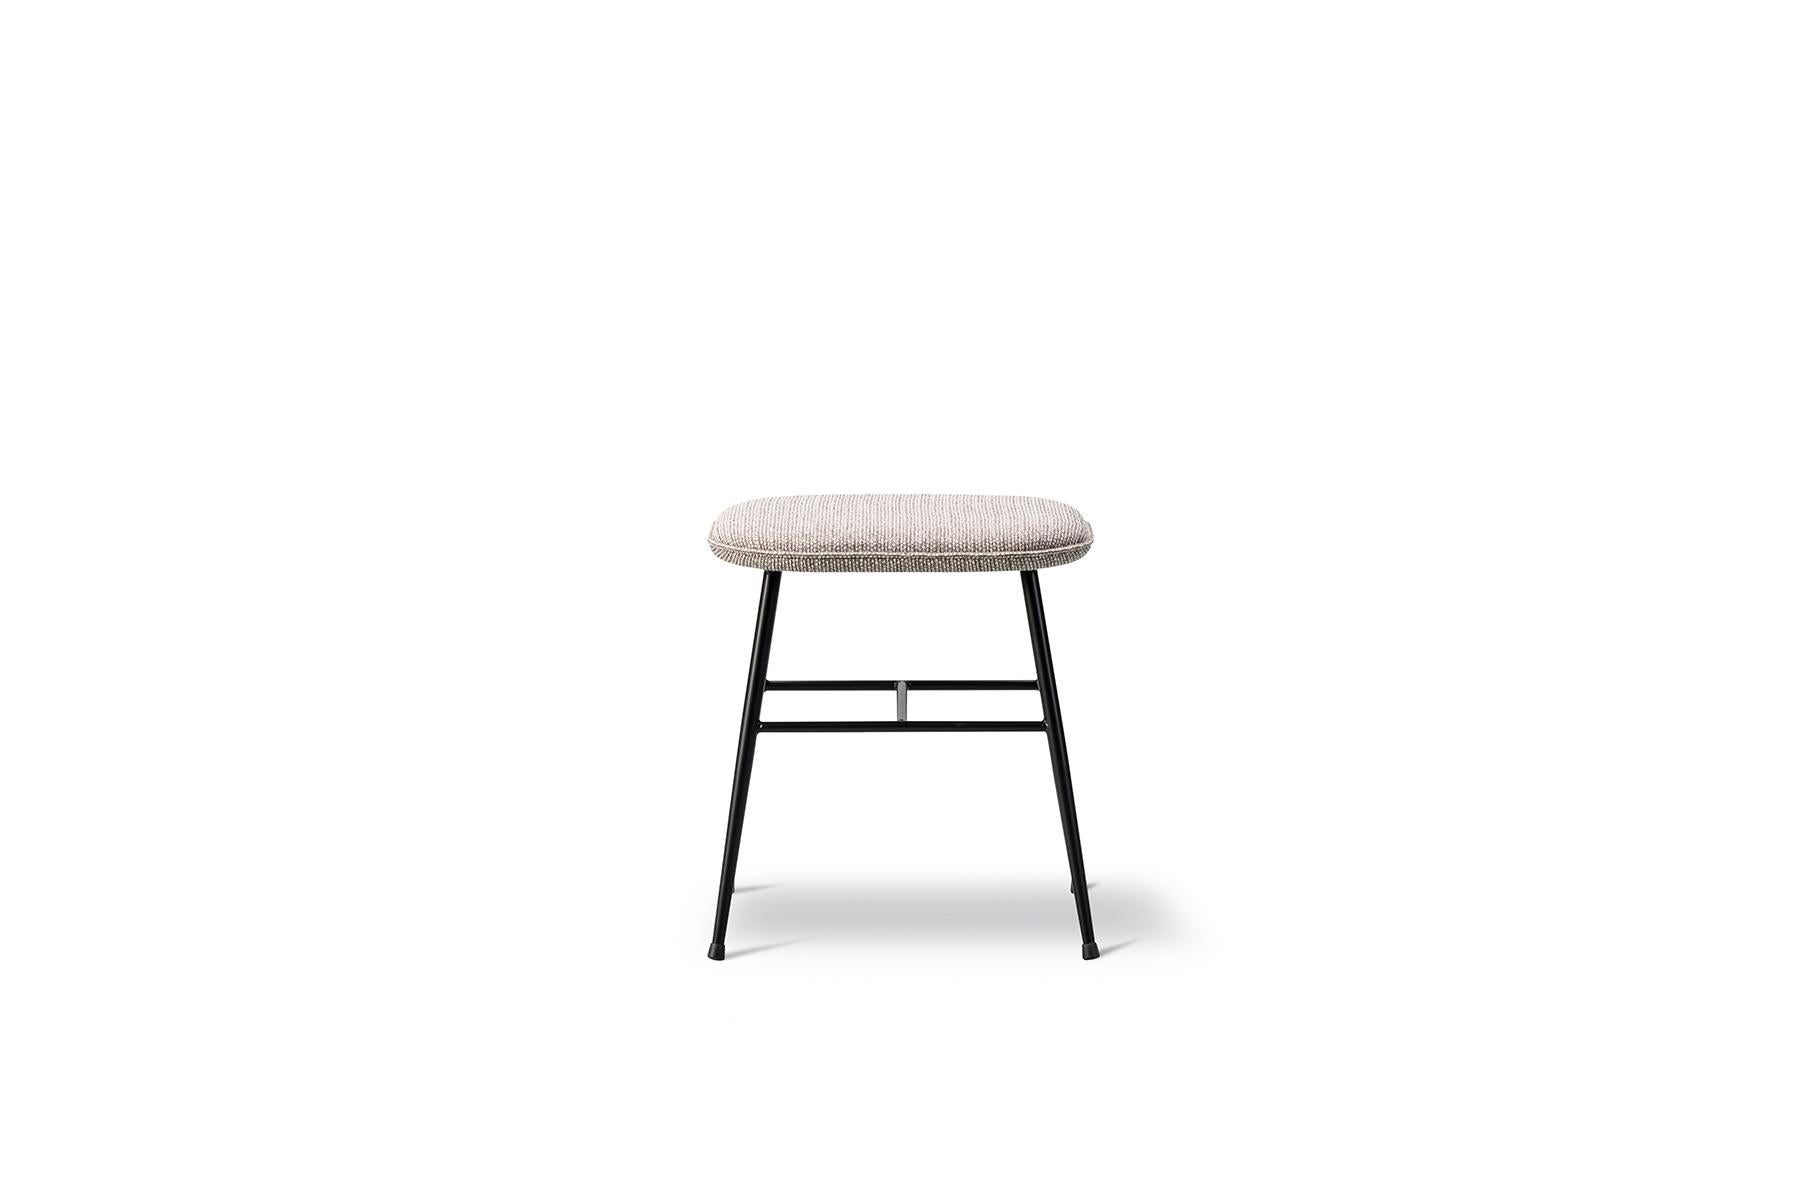 Space copenhagen spine stool (Low) – Metal Base A clean and modern visual language characterises the Spine collection, and this latest addition of a metal base strengthens the stunning expression of the family. The simple lines of the metal leg